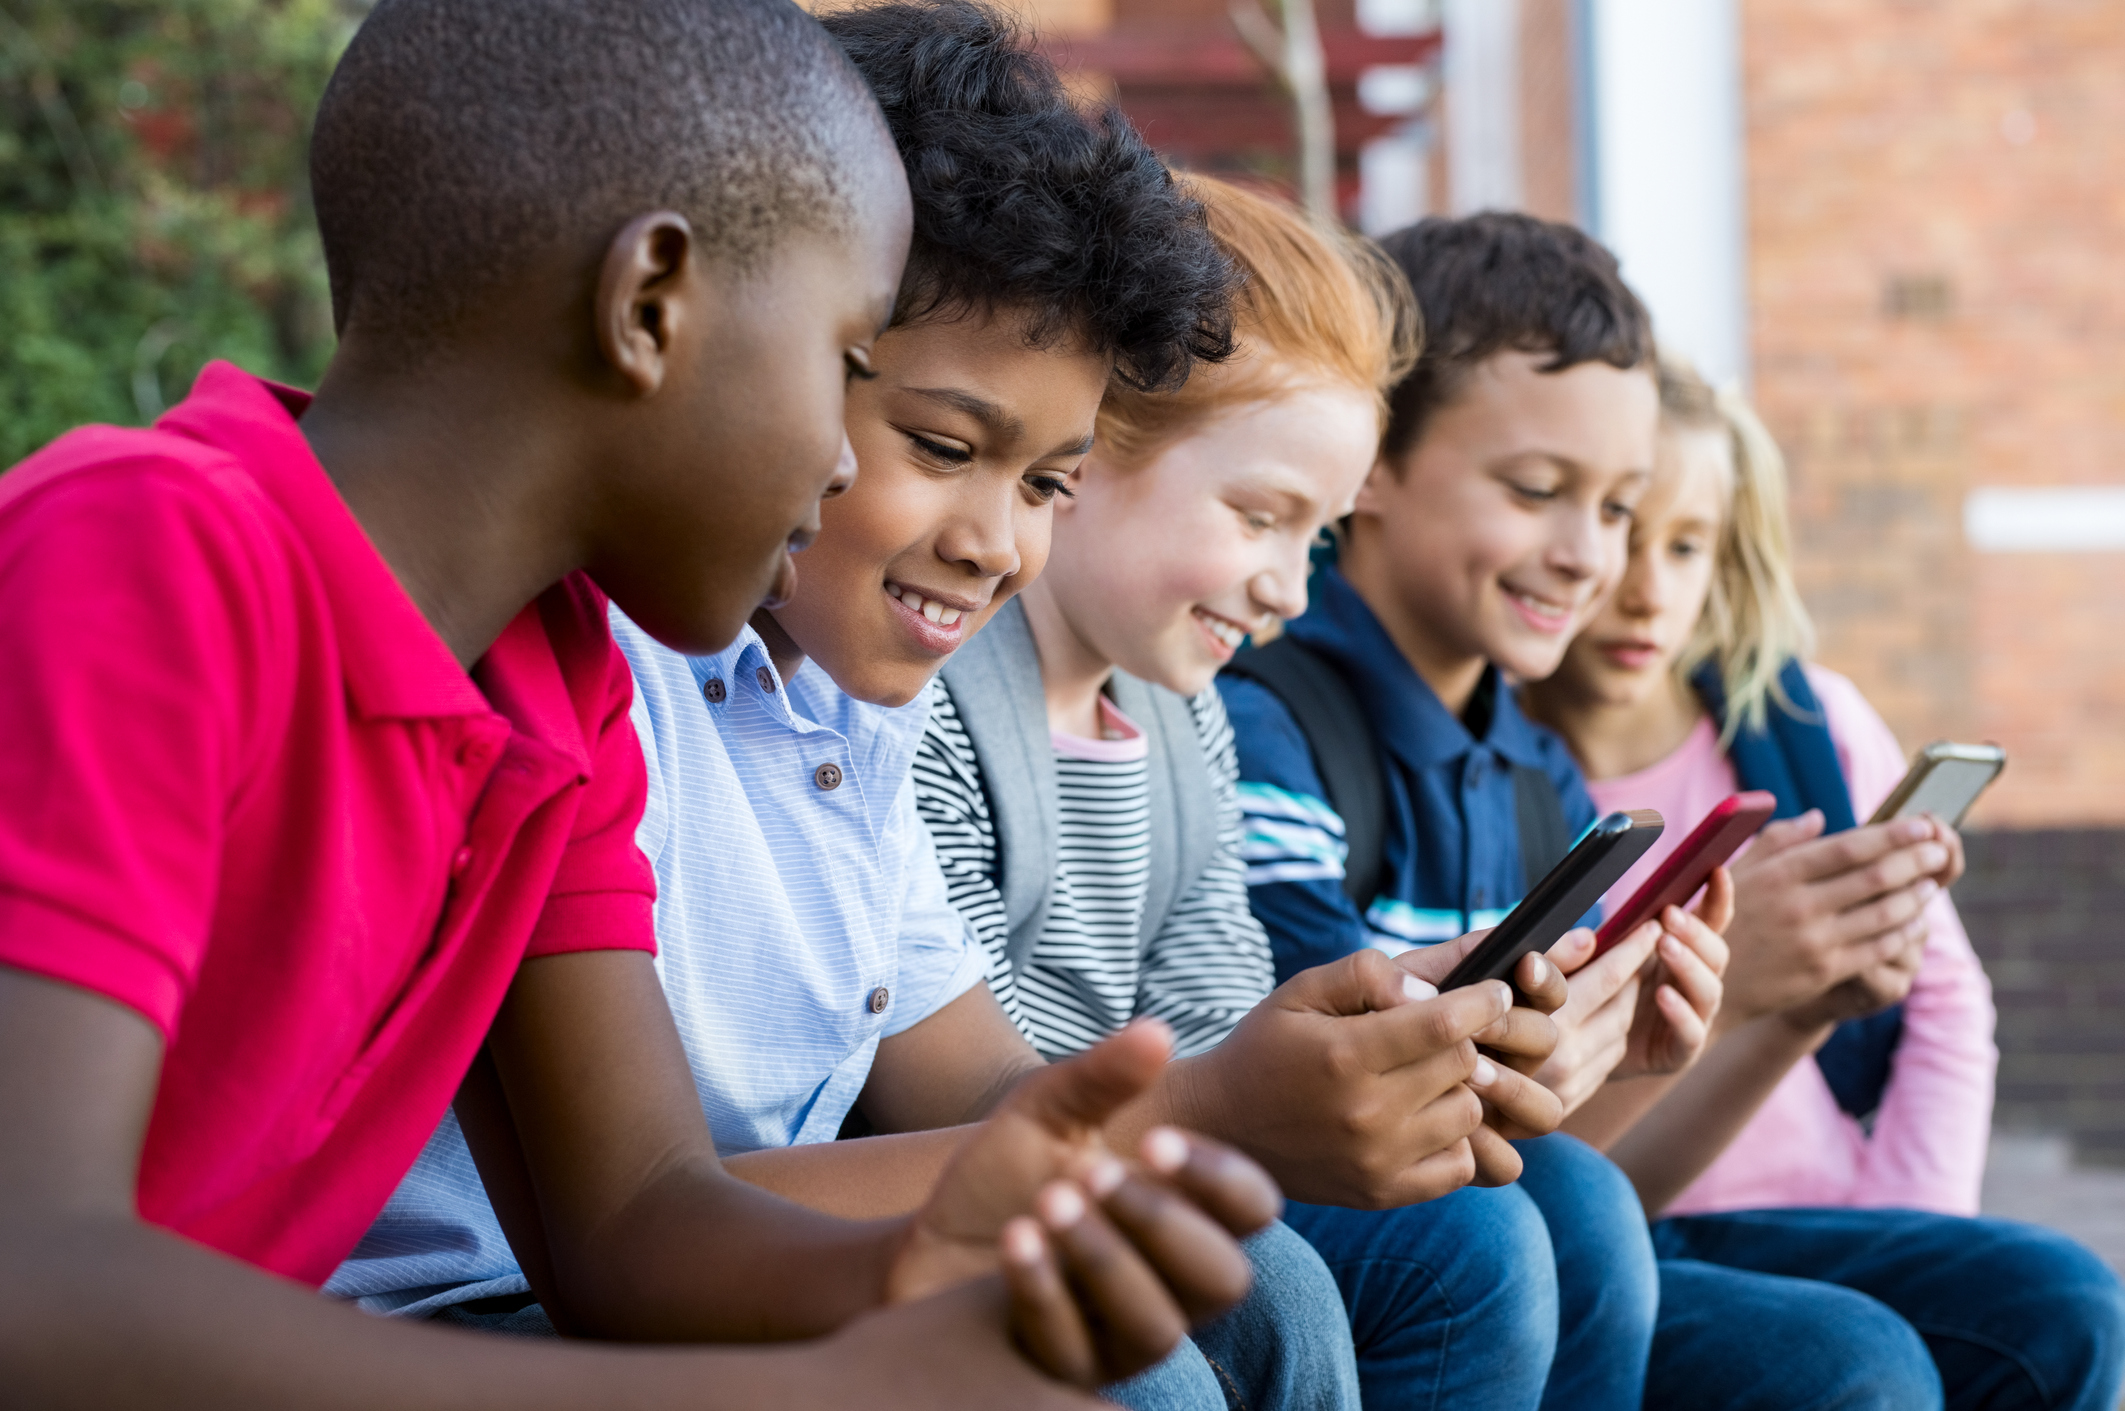 The Heart of the Matter: Cell Phones in School